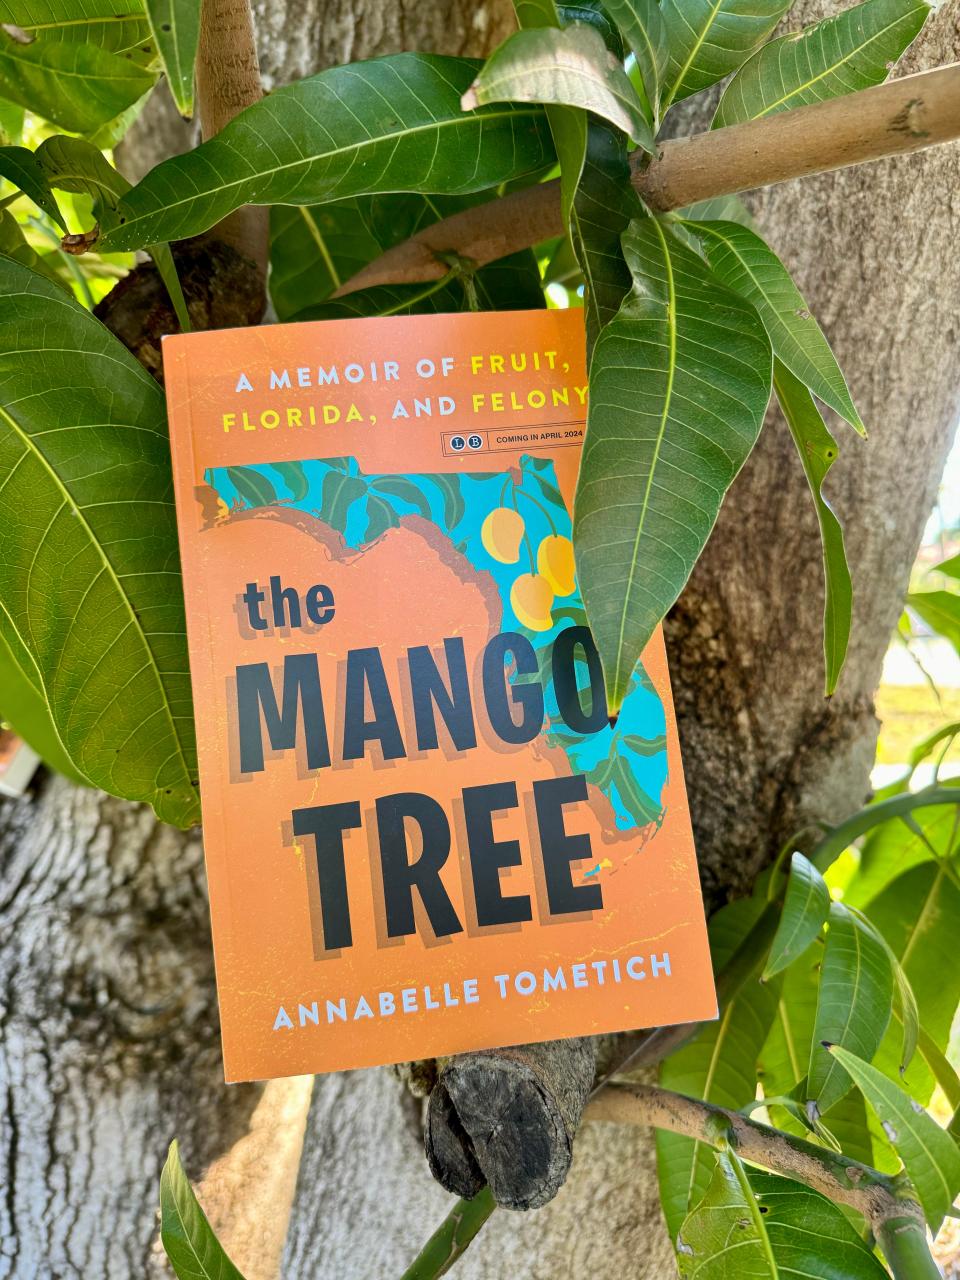 The memoir "The Mango Tree" was written by Annabelle Tometich, former food-and-dining writer for The News-Press and Naples Daily News.